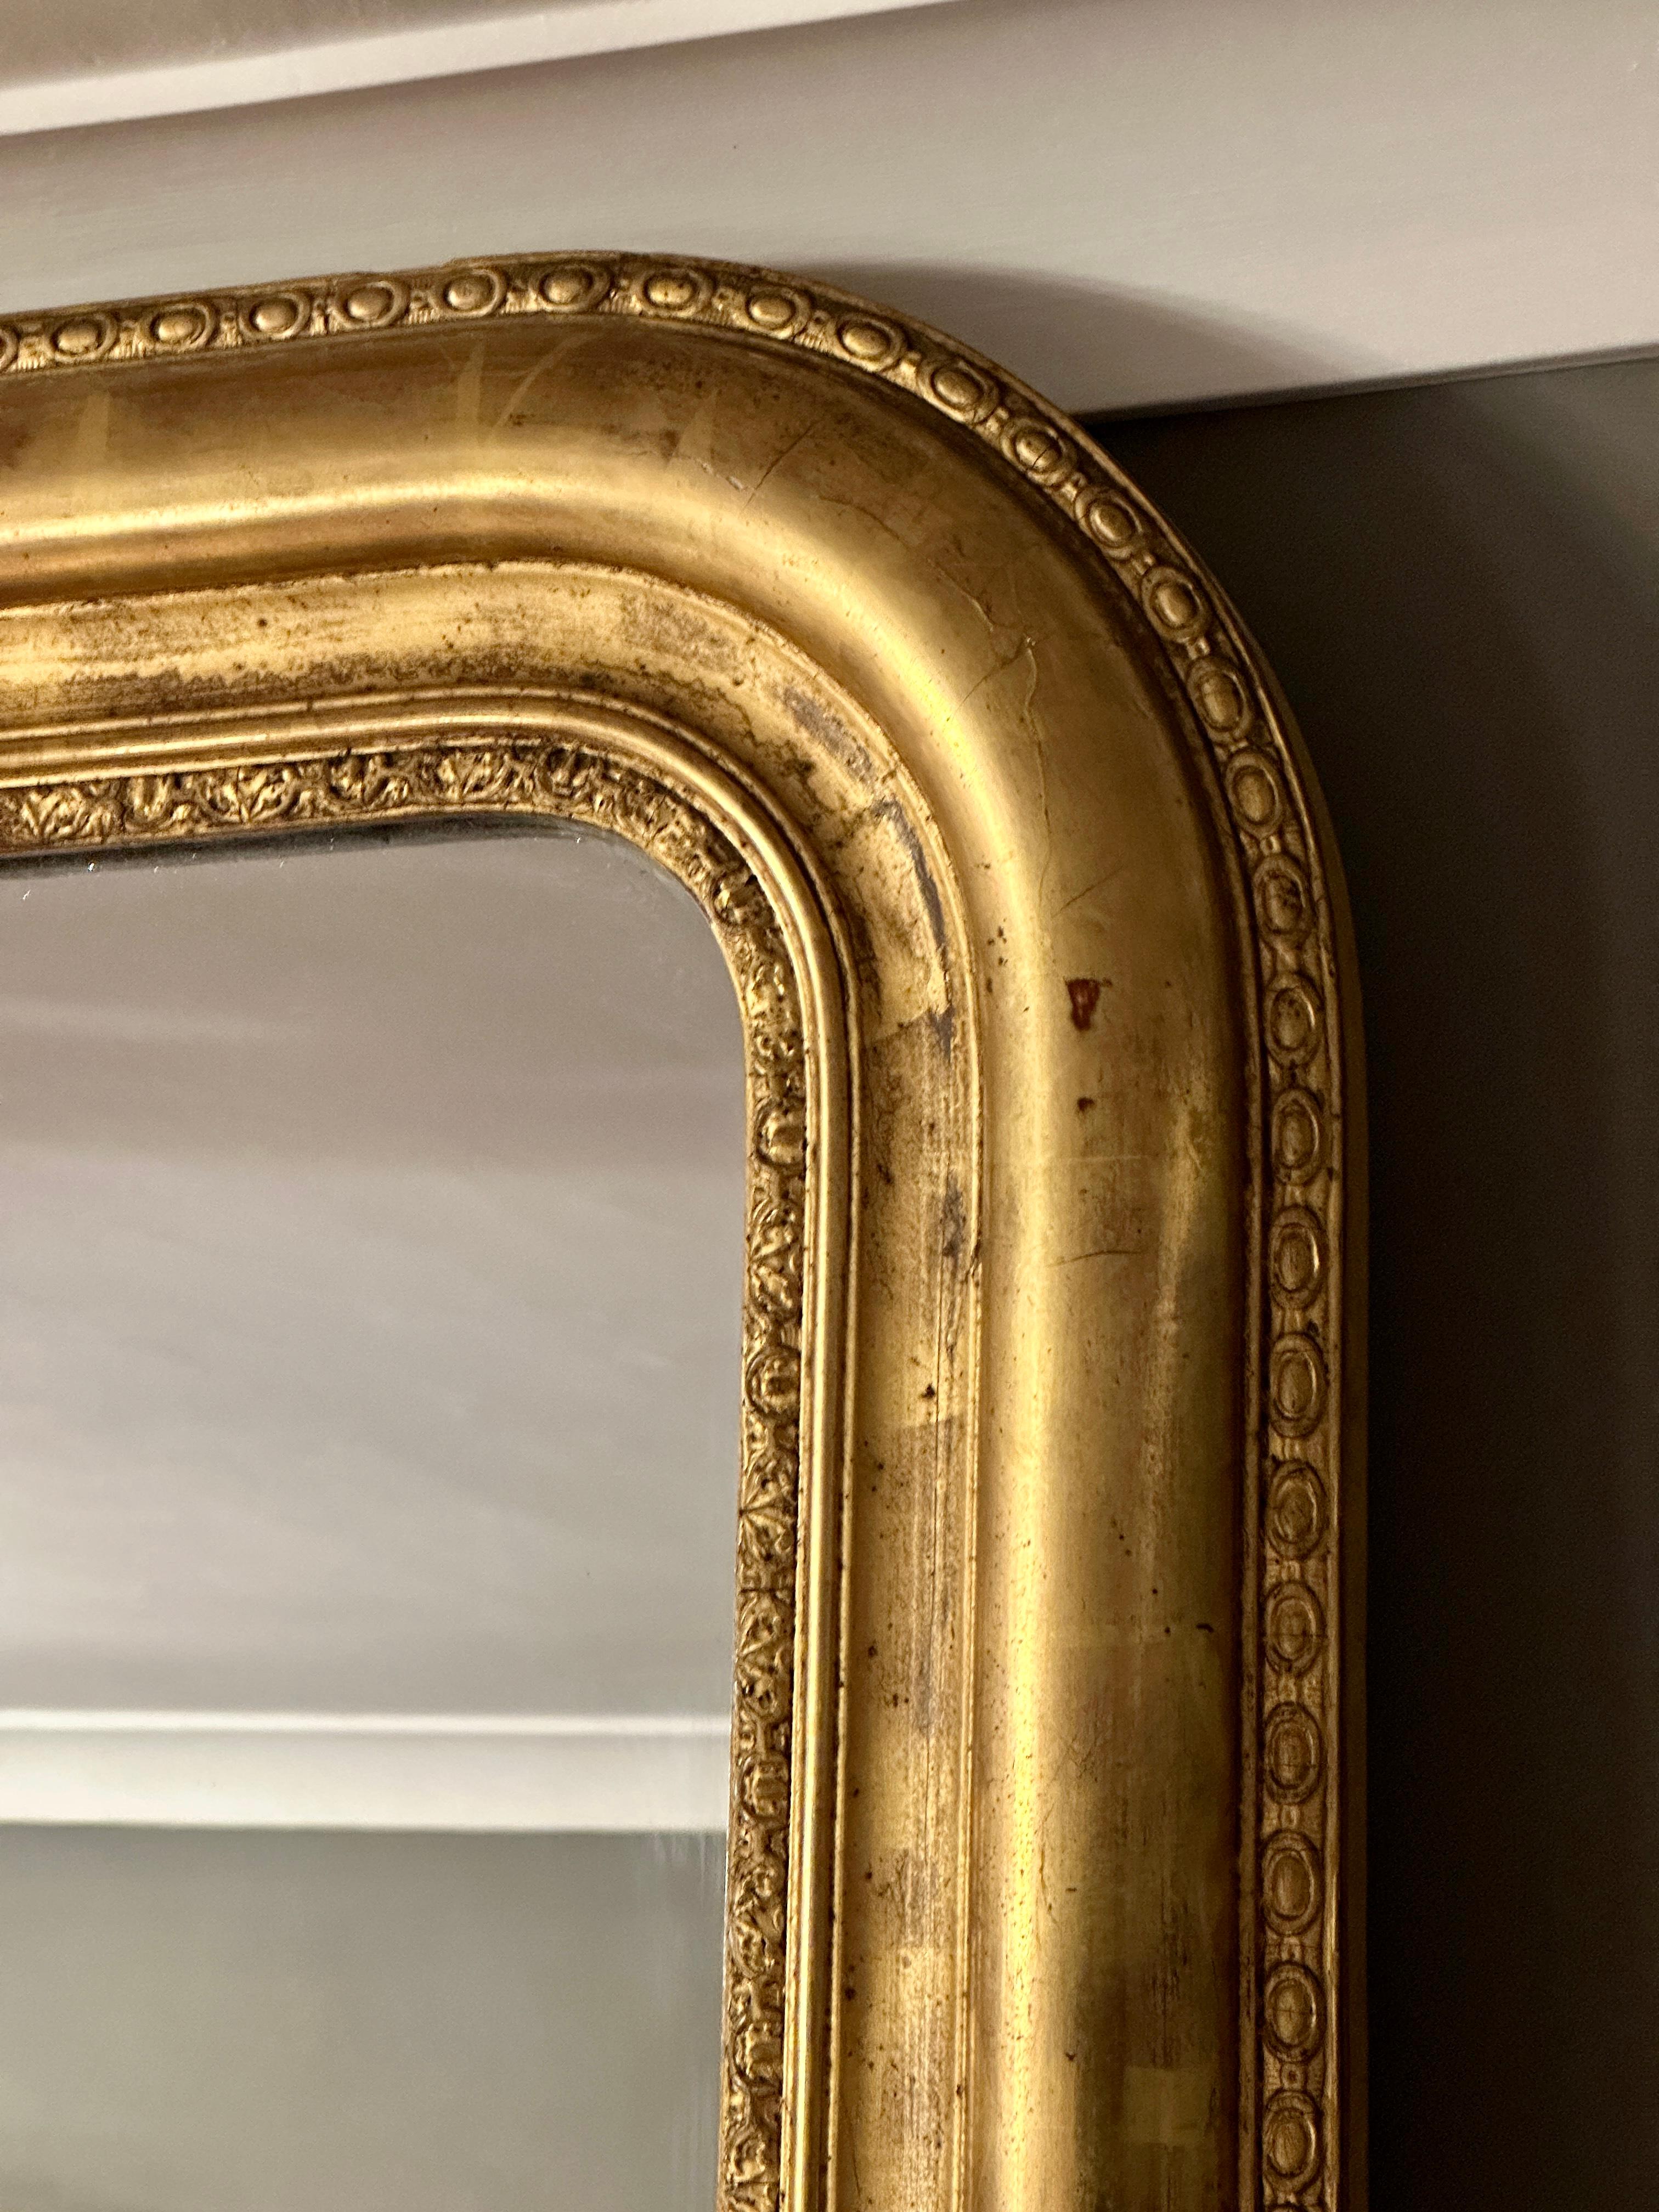 An antique domed toped gold gilt mirror with original mercury plate glass and backboards. Mid 19th century, imported from Paris. Little foxing in the mirror but overall very clear reflection. Warm patination on the gilt work, decorative frame.